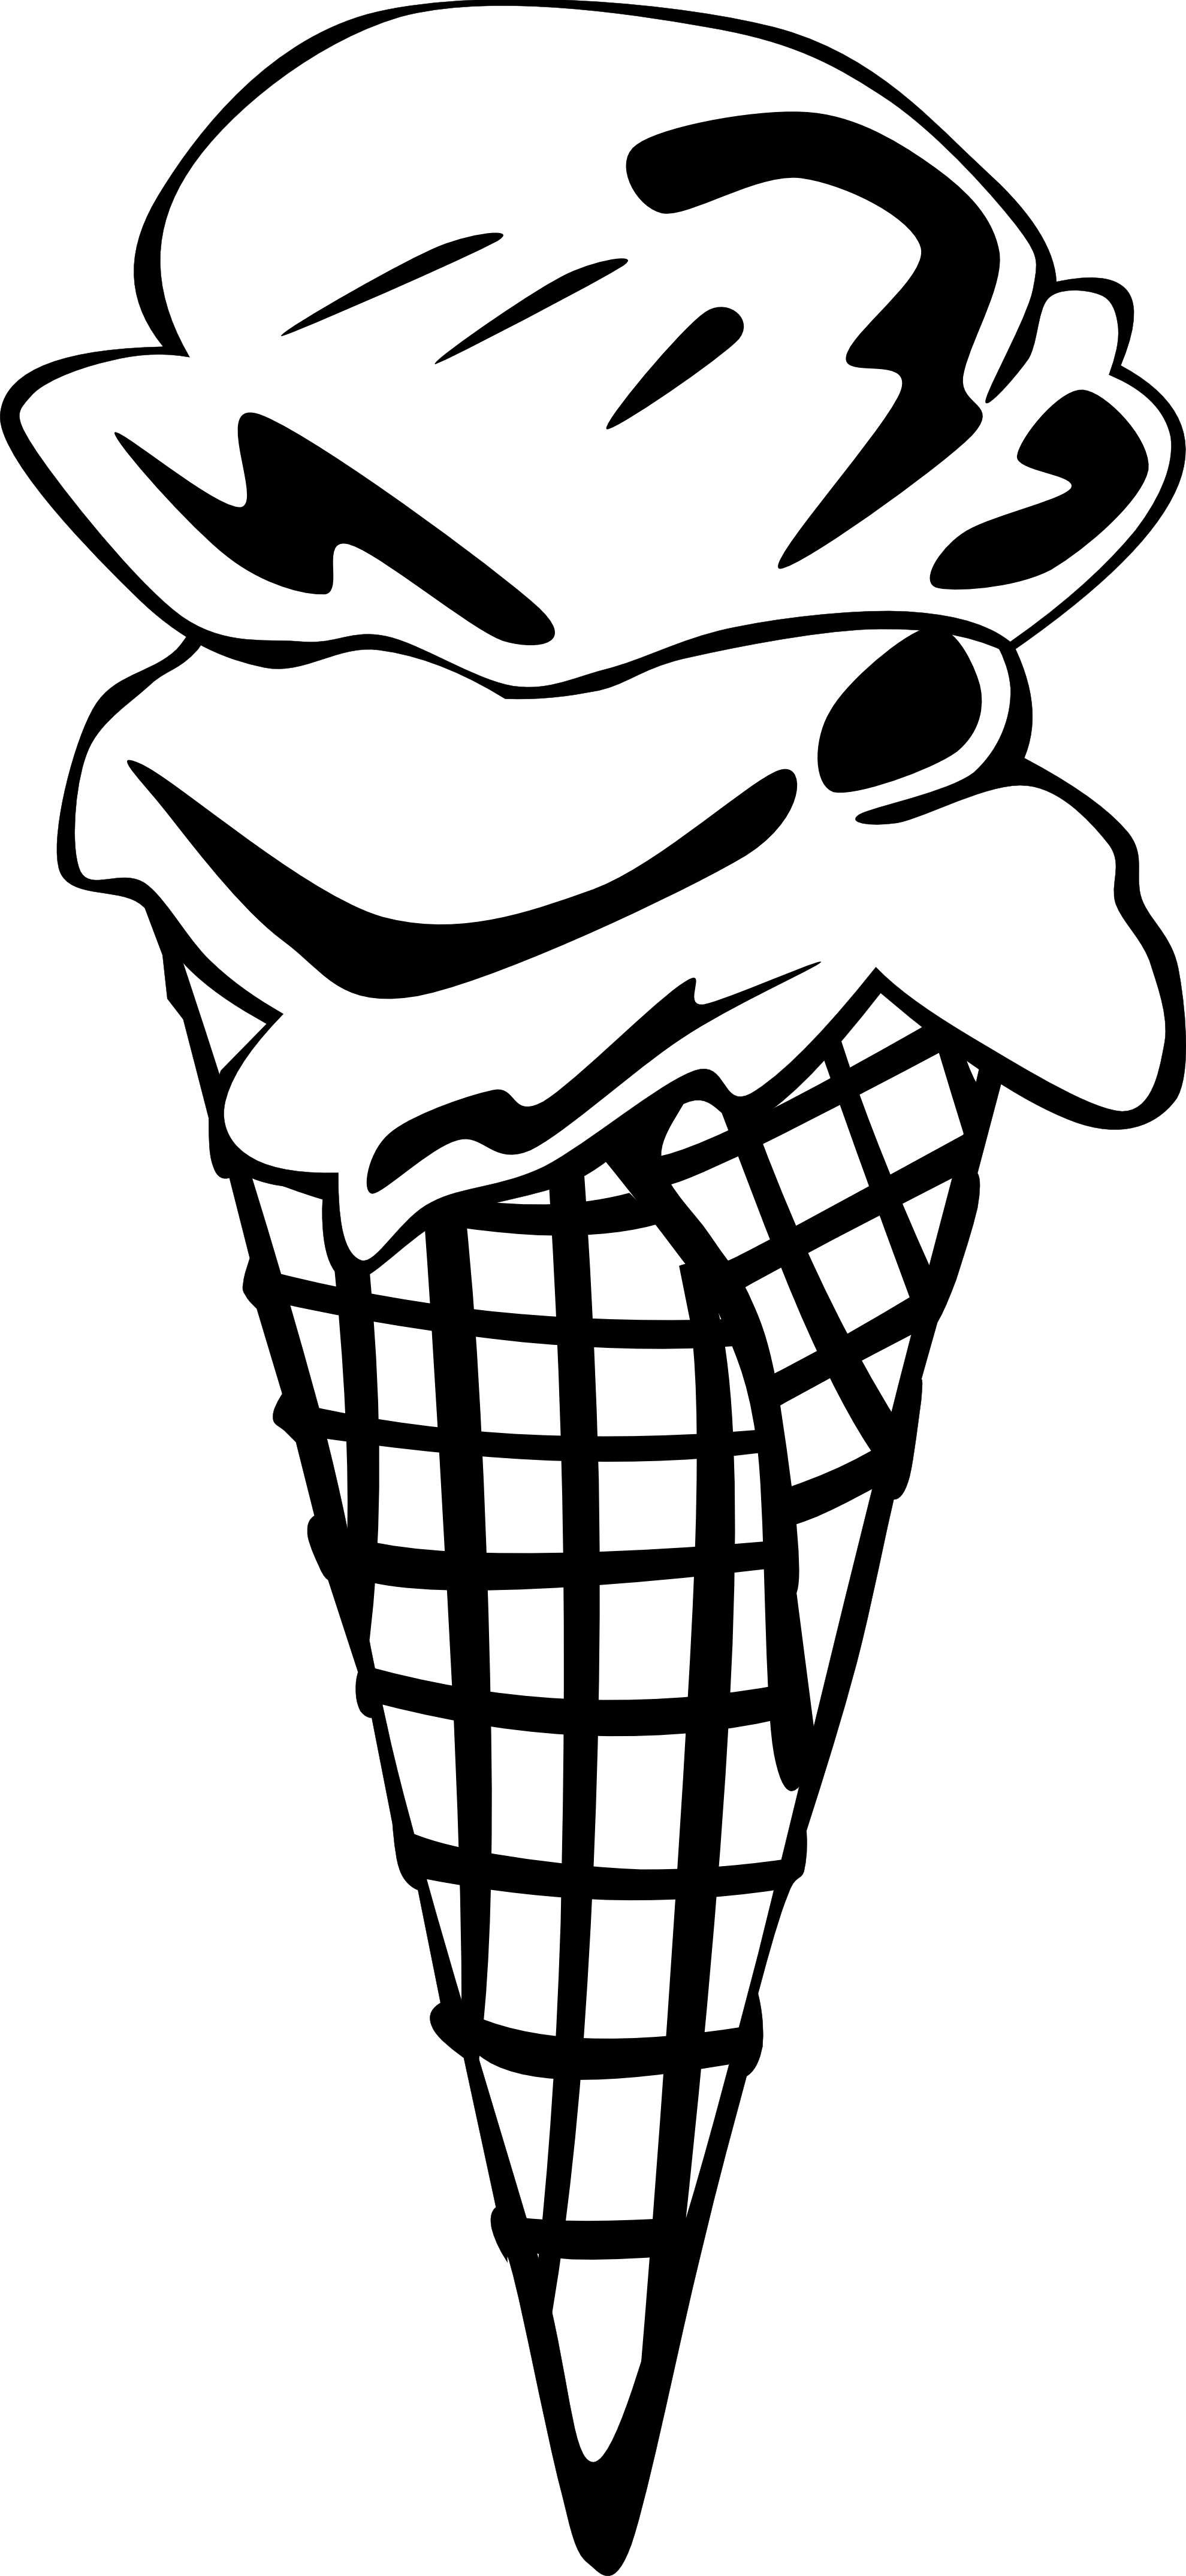 Clipart of ice cream black and white 